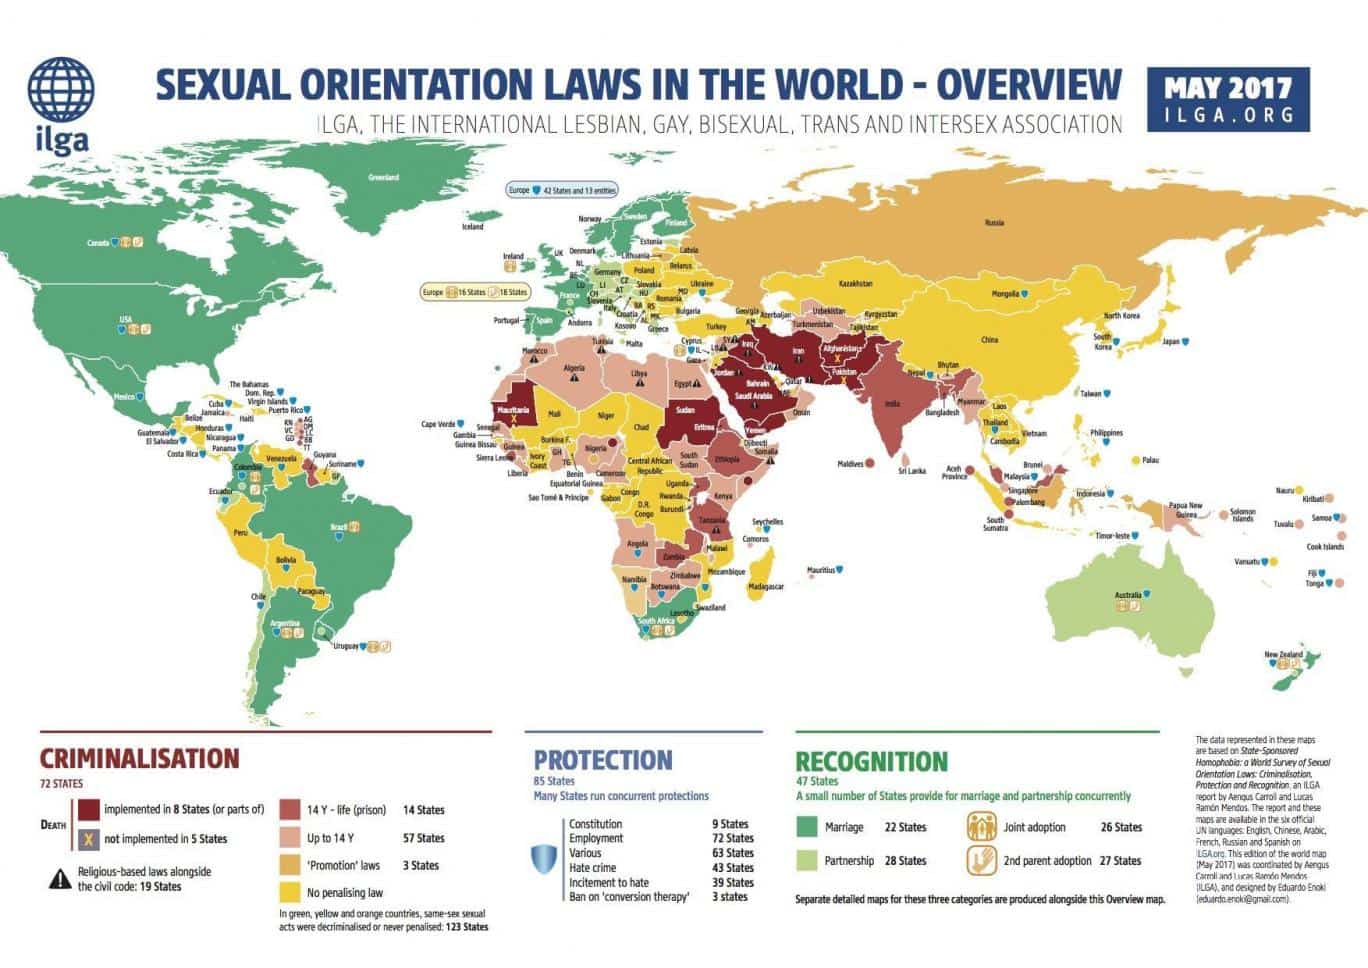 Sexual Orientation Laws in the World - Overview